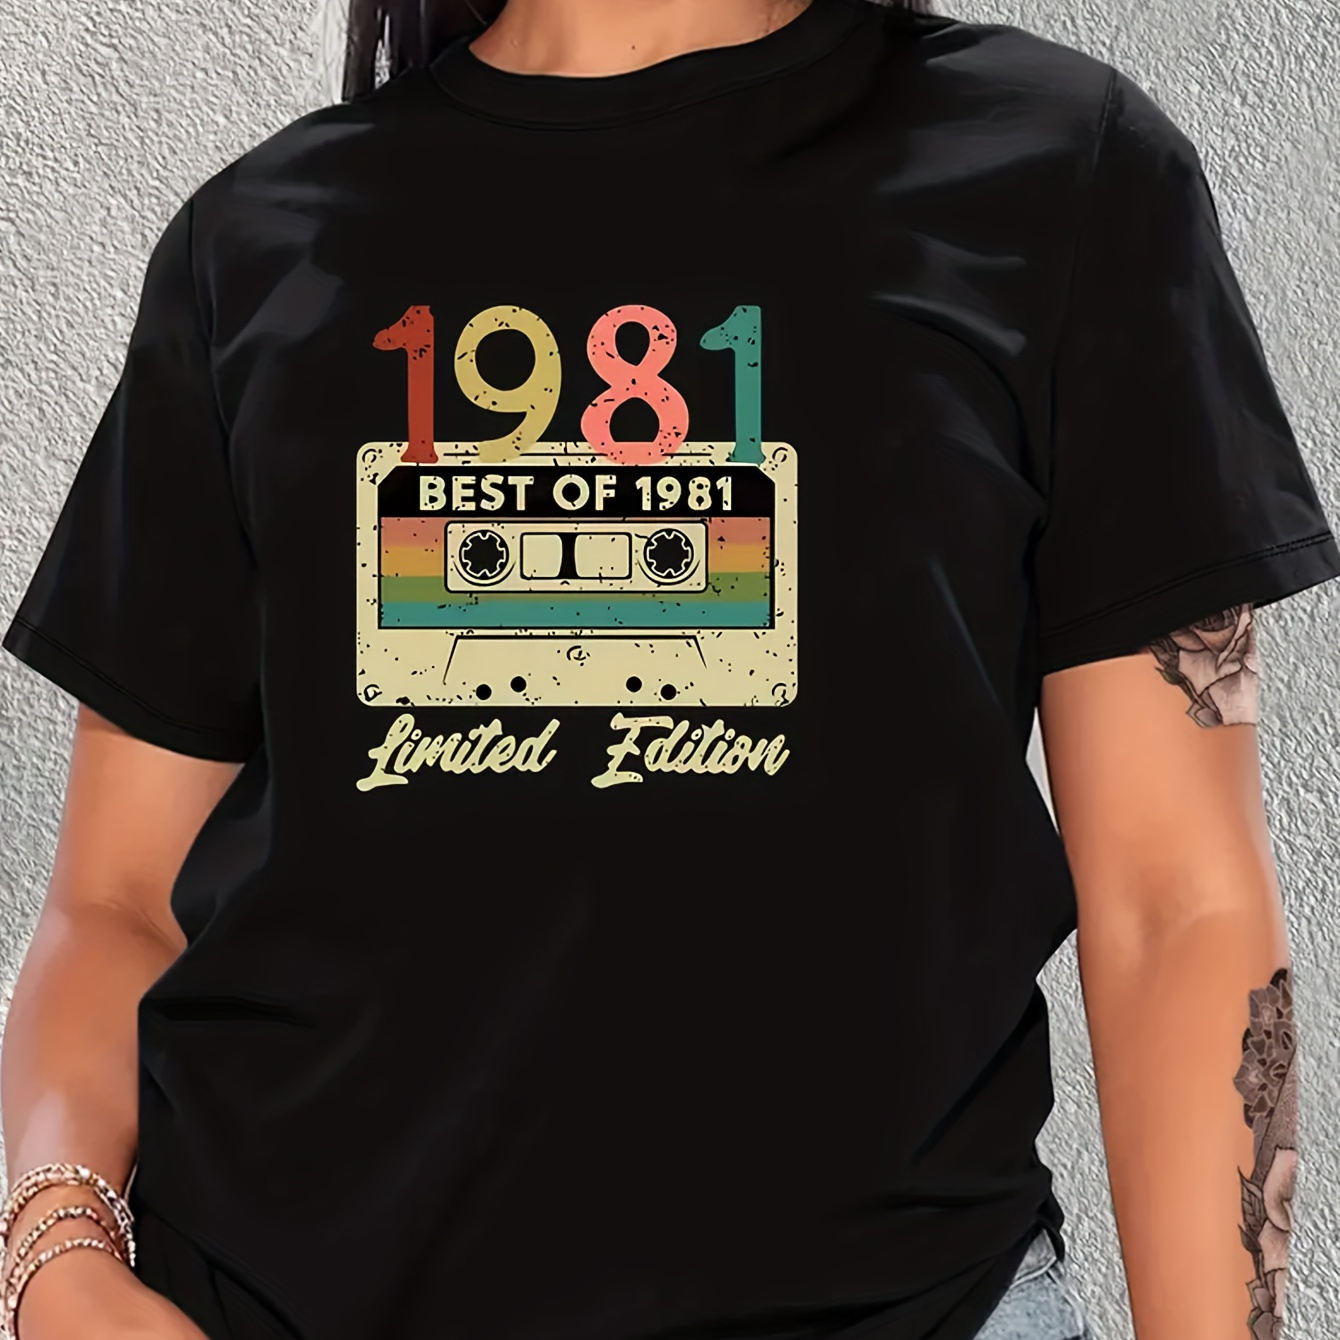 

Vintage Cassette Tape Graphic T-shirt For Women, "best Of 1981 Limited Edition" Print, Casual Loose Fit Crew Neck Tee, Retro Style Clothing